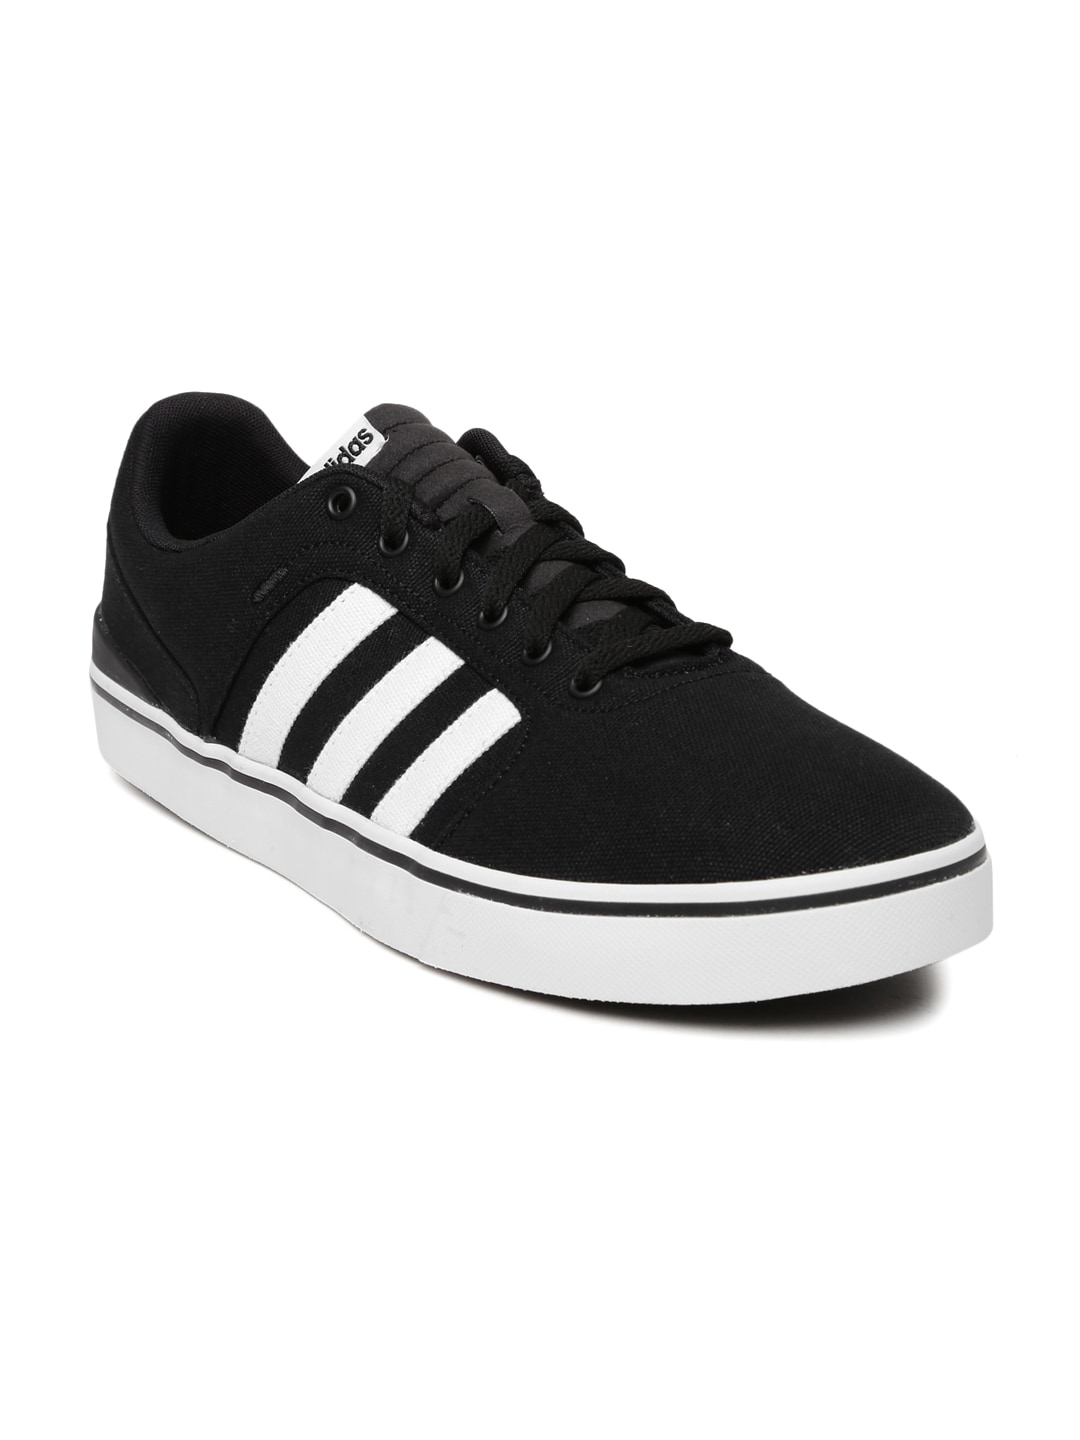 Reduction - adidas neo men black hawthorn st sneakers - OFF 63% - Free  delivery - www.ostellionline.it